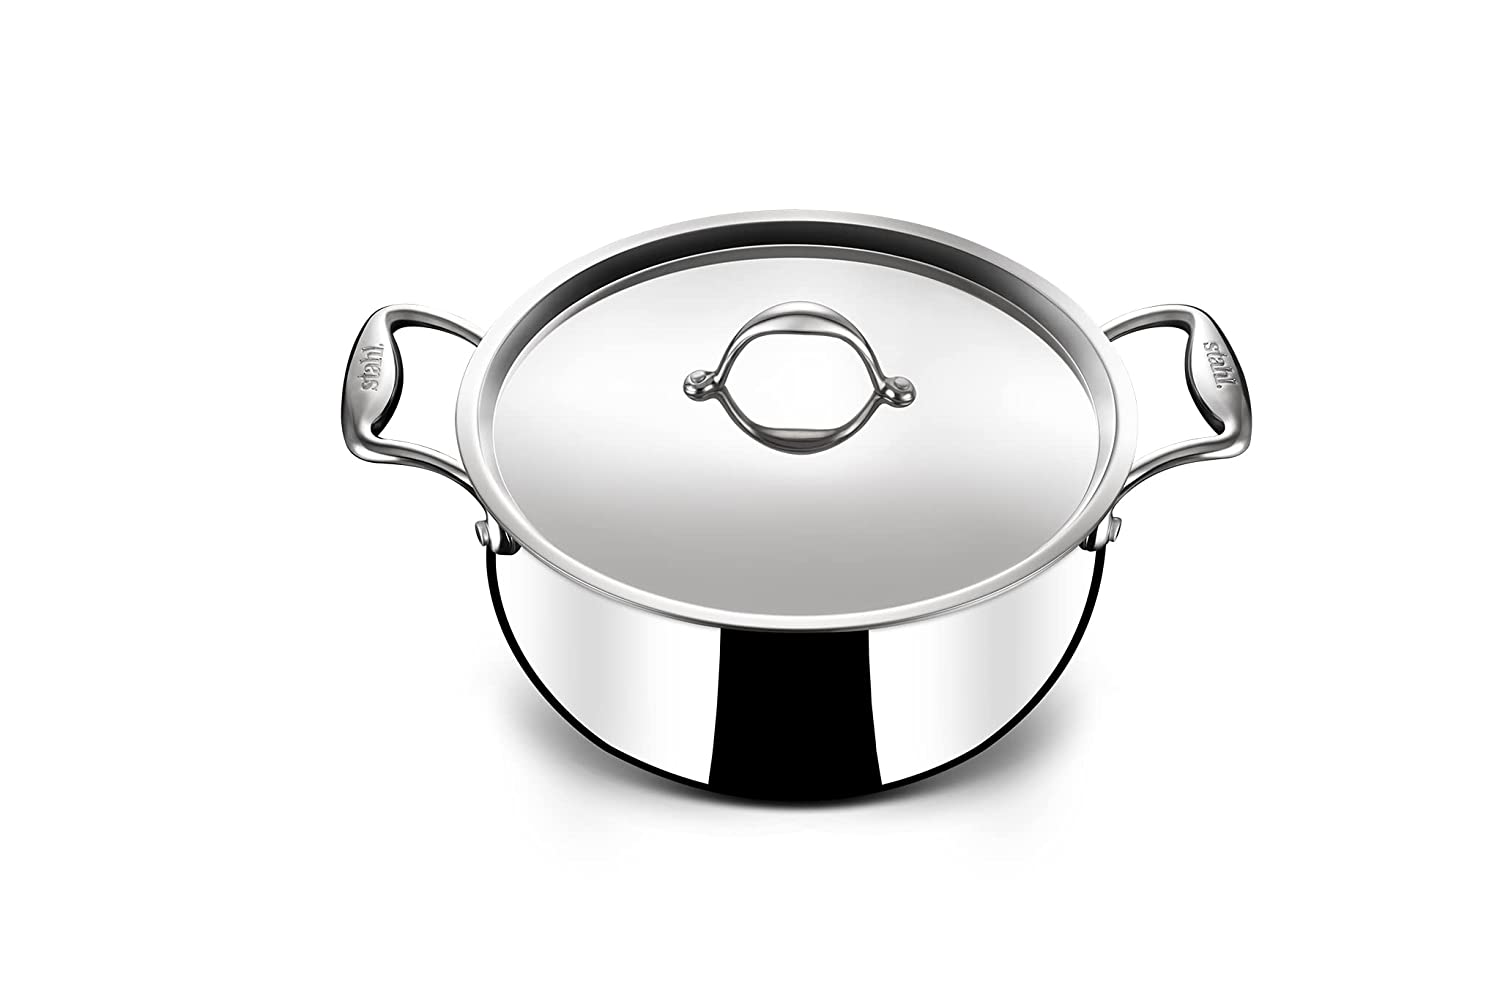 Stahl Triply Stainless Steel Artisan Belly Pot with Lid